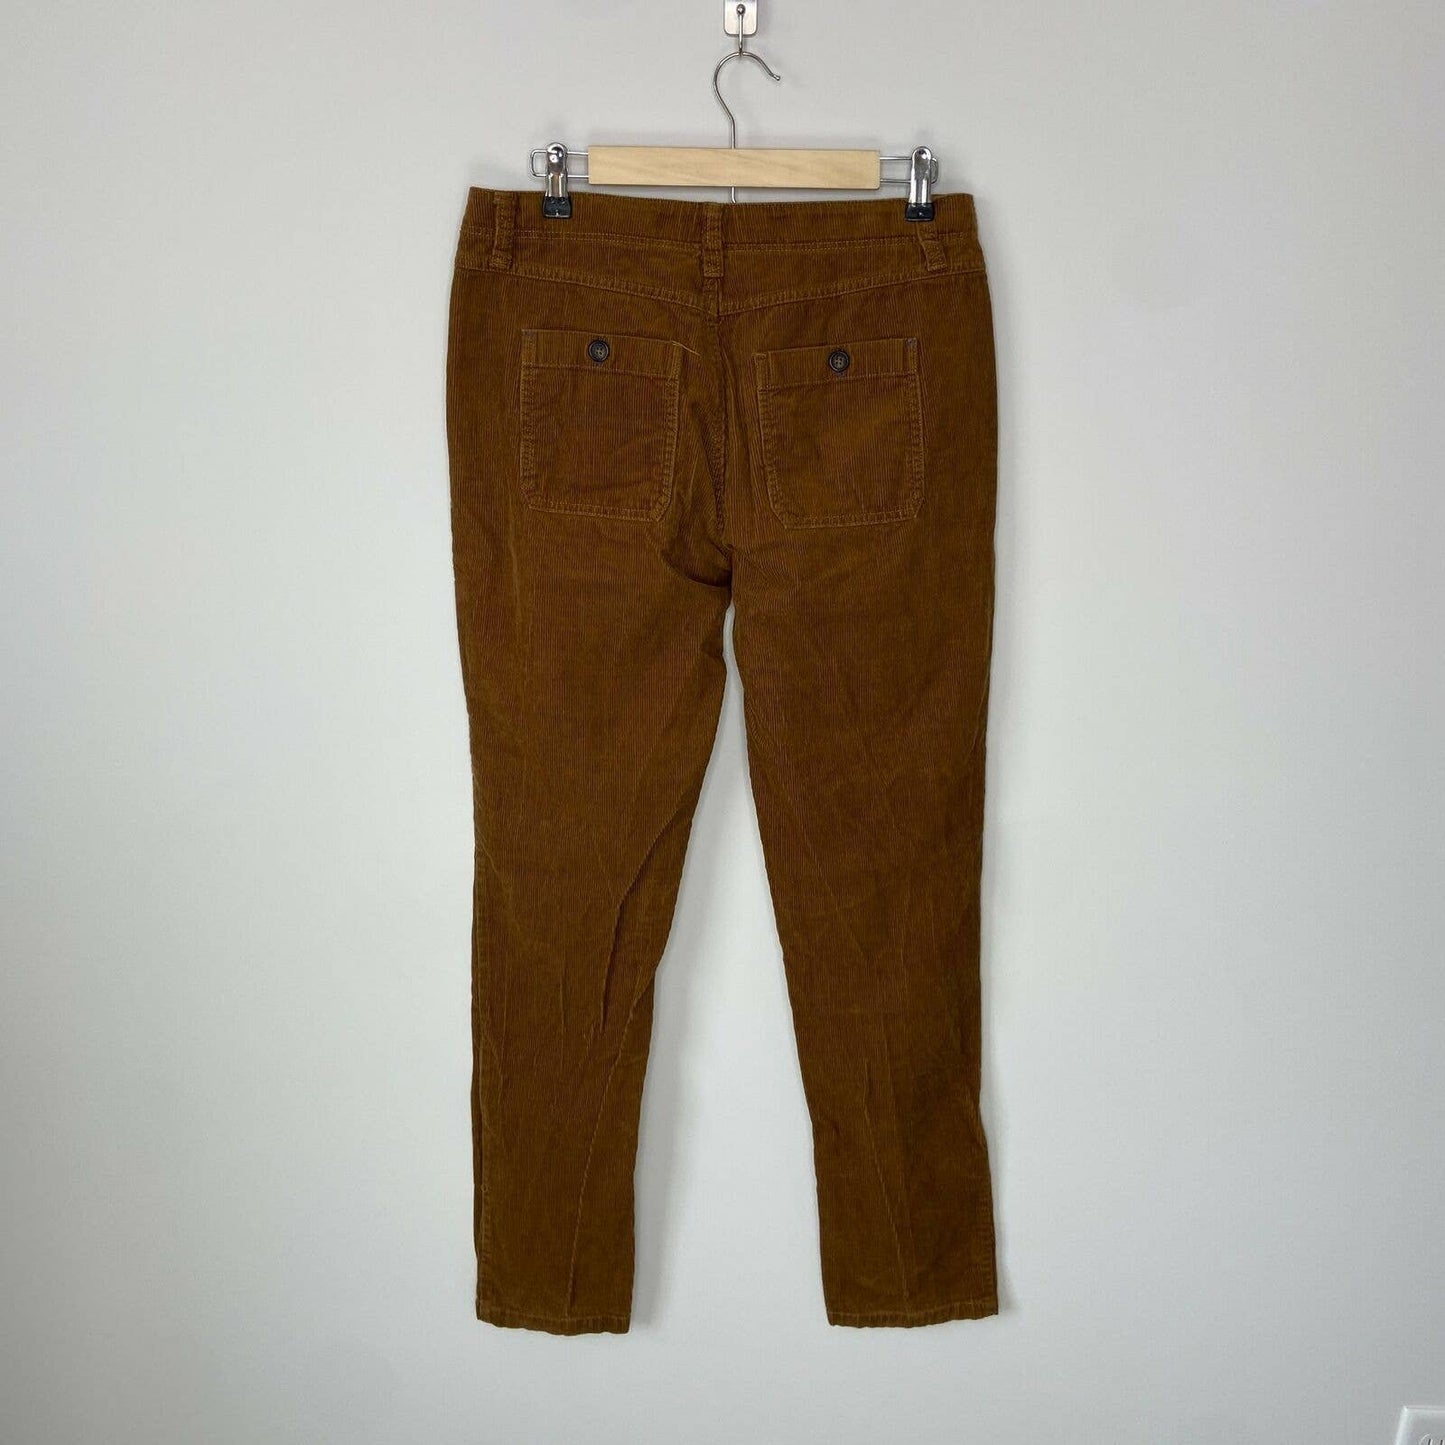 Boden Corduroy Camel Colored Pants - Youth Size 16